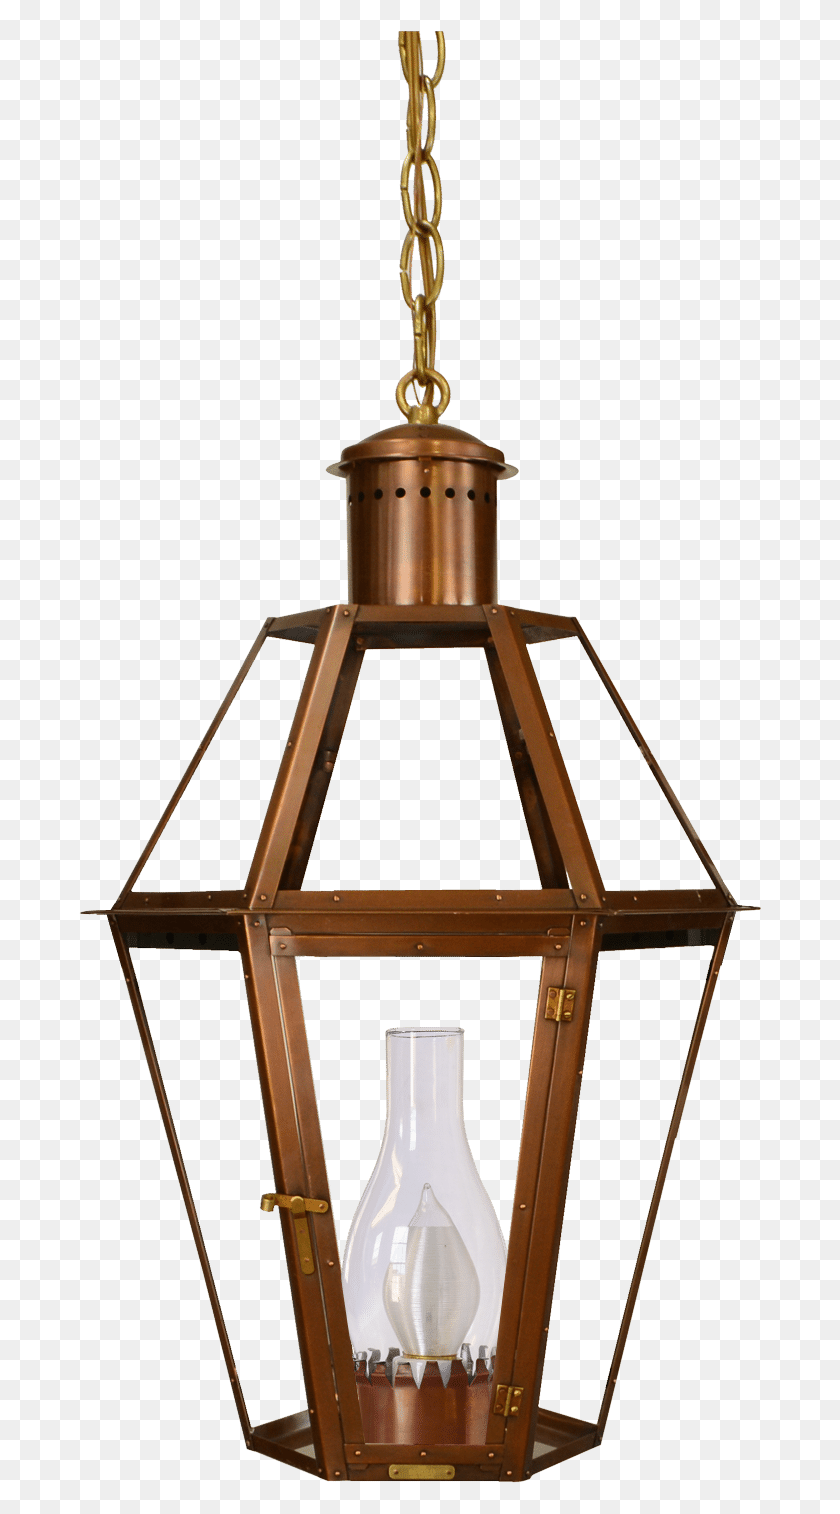 683x1454 Six Sided Hanging Chain Or Stem Fixture Gas Lighting, Lamp, Lantern, Lampshade Descargar Hd Png